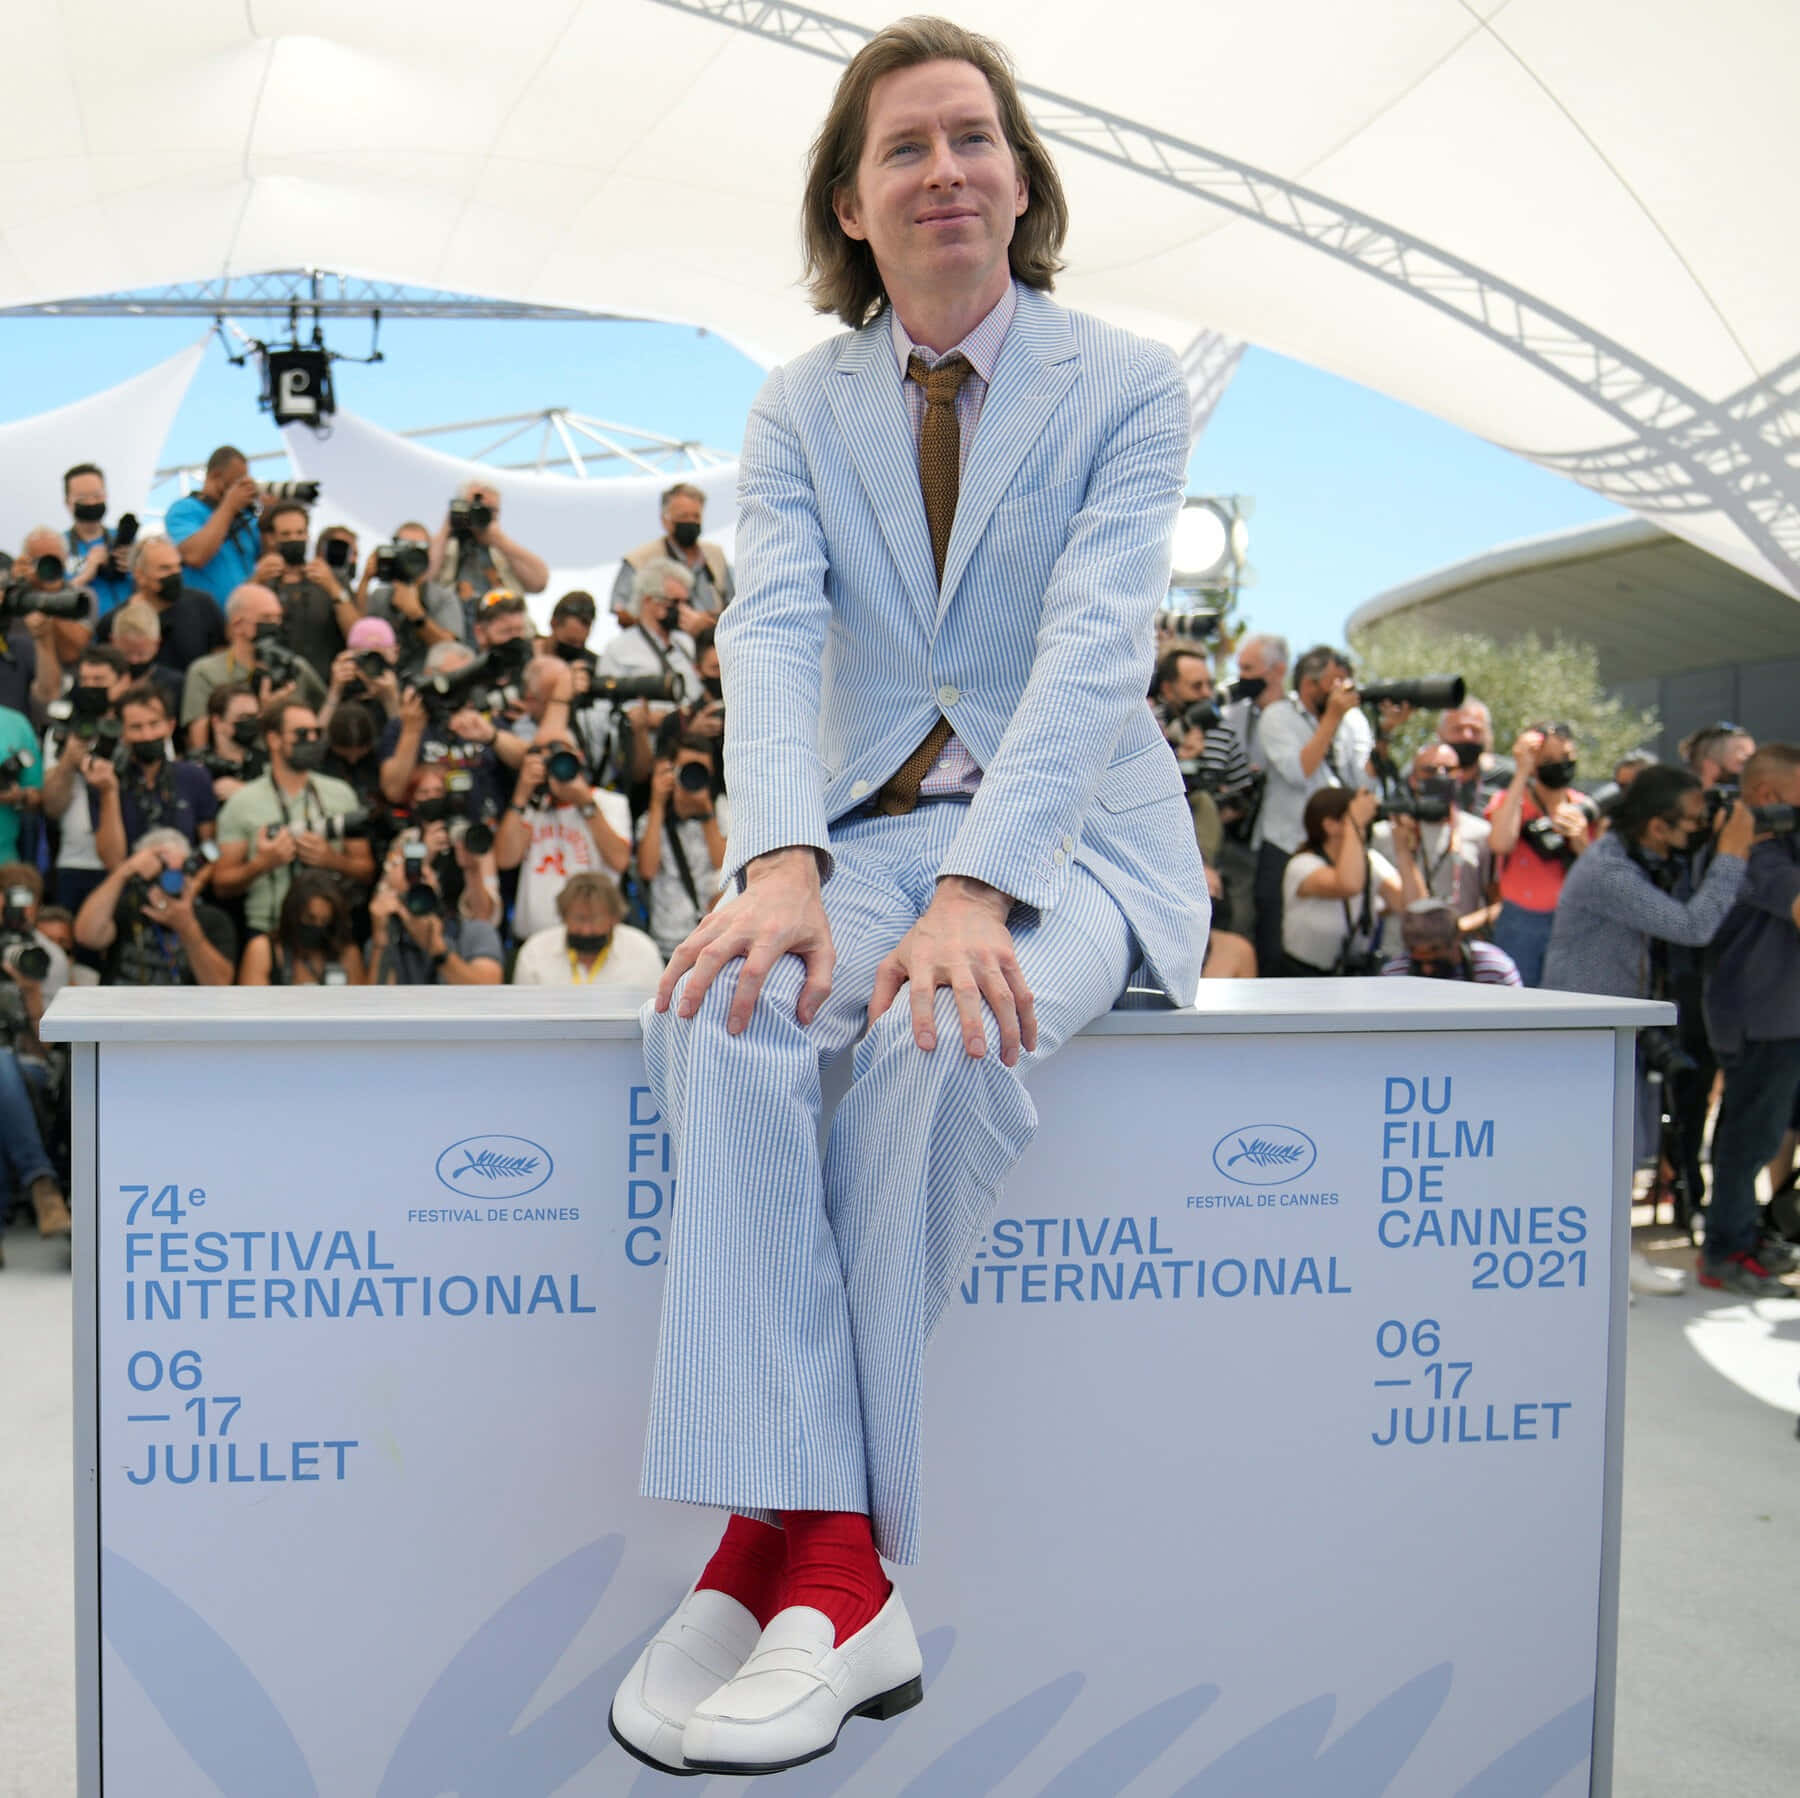 Wes Anderson Cannes Film Festival2021 Wallpaper